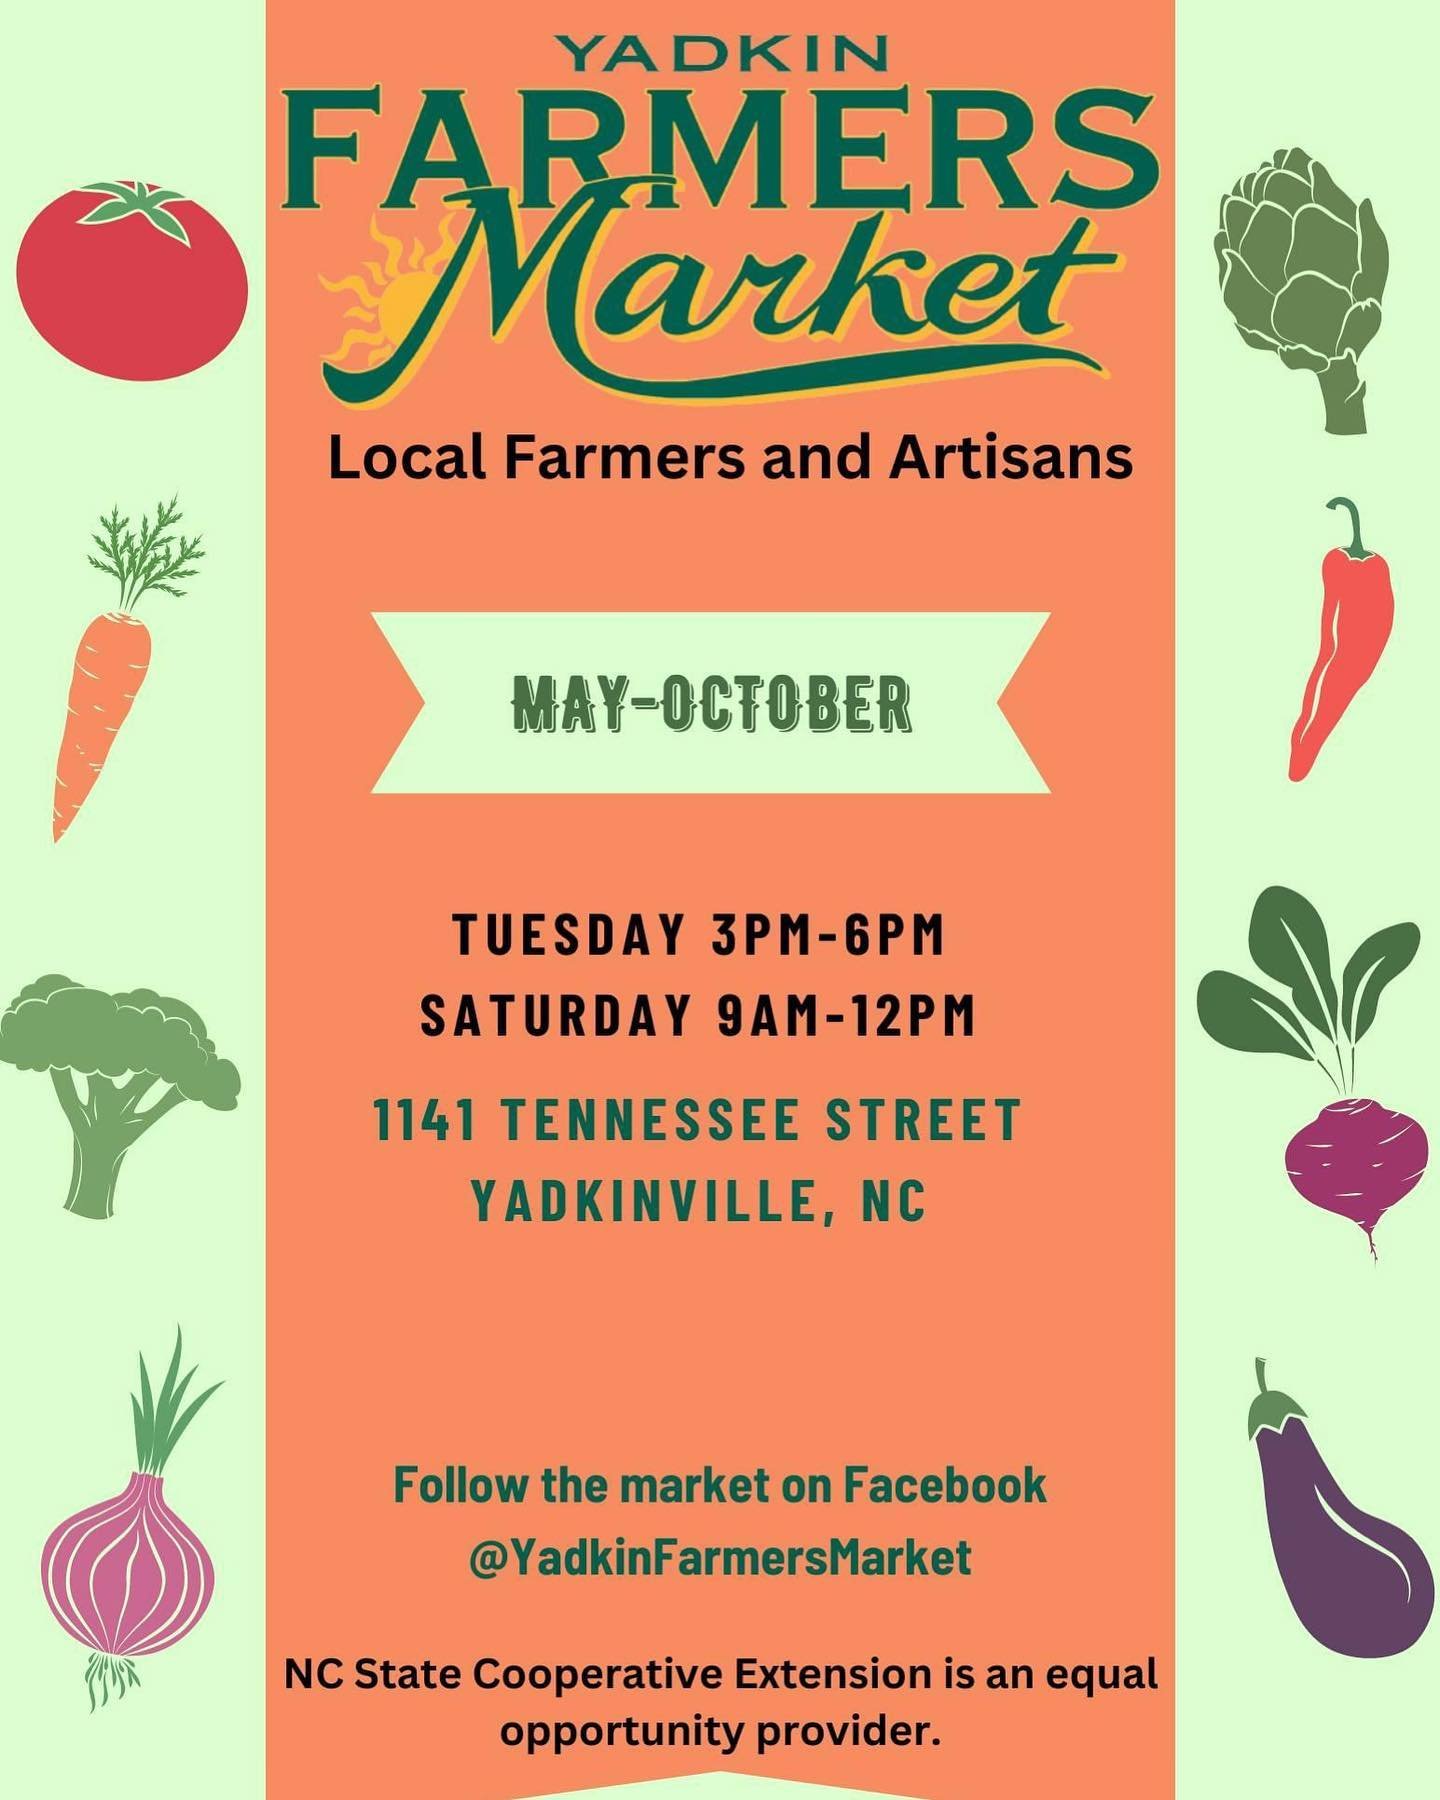 The Yadkin Farmers Market starts today, May 7th at 3:00PM!

Some of the items available today include:

Sweet potatoes, lettuce, onions, radishes, dahlia tubers, mixed lettuce bags, tomato plants, fresh cut lemon balm, radishes, key lime pound cake, 